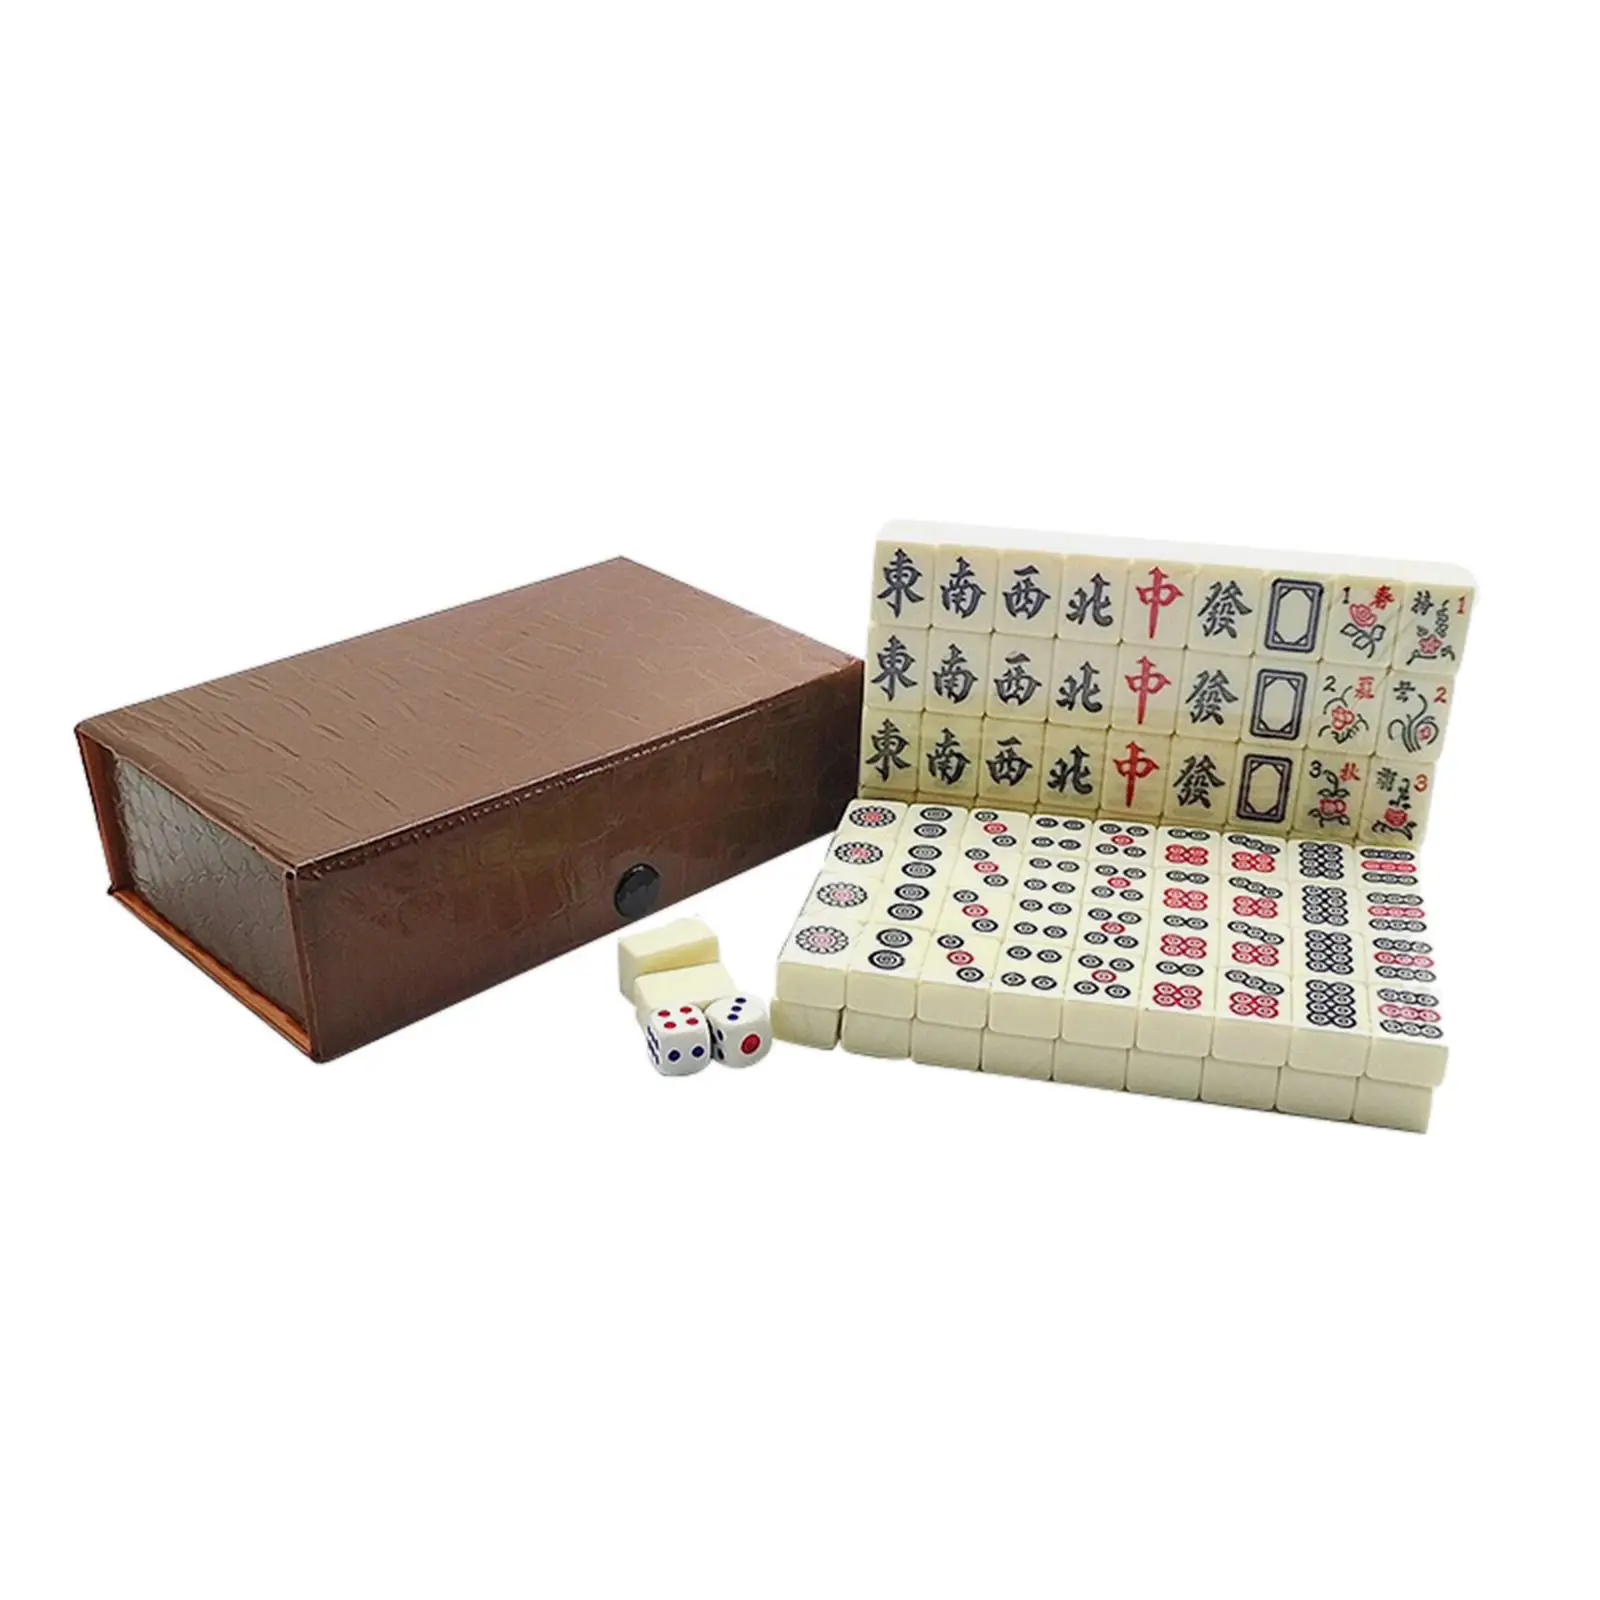 Antique Chinese Mahjong Game Set with Storage Box Traditional Chinese Version Game for Family Leisure